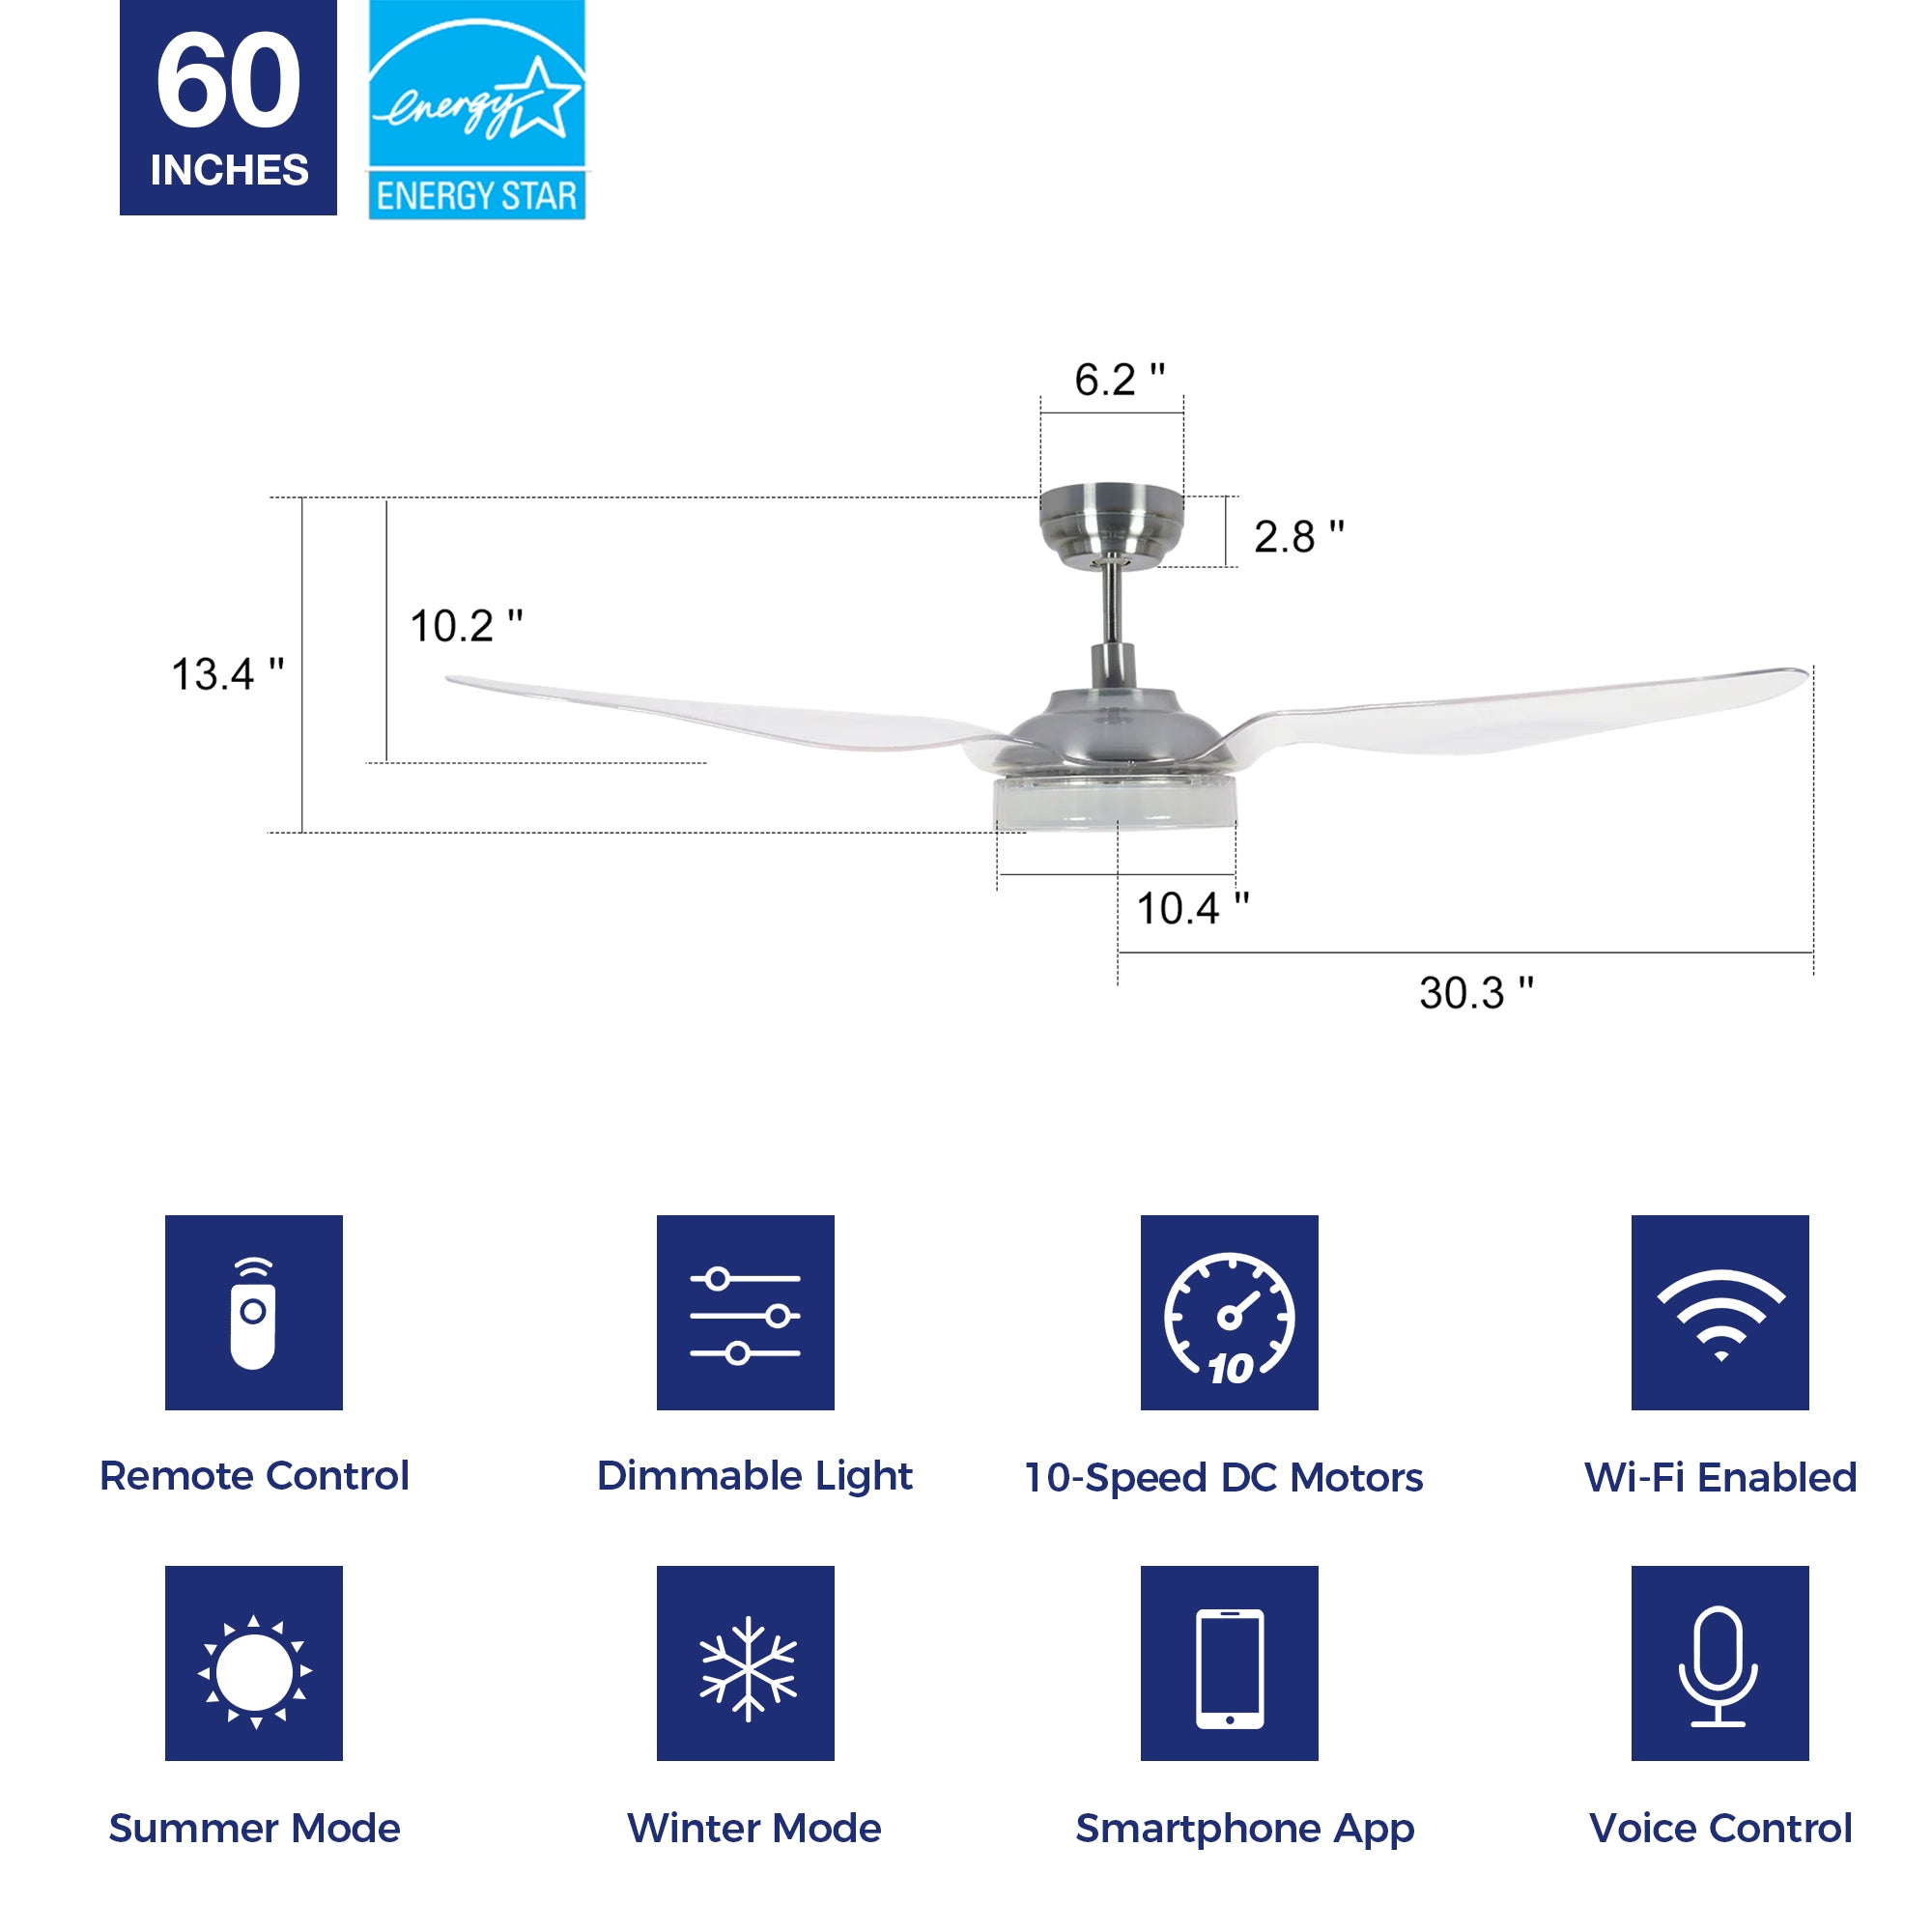 Icebreaker Outdoor 60-inch Smart Ceiling Fan with LED Light Kit-Silver Case and transparent Abs Fan Blades. The fan features Remote control, Wi-Fi apps, and Voice control technology (compatible with Amazon Alexa and Google Home Assistant ) to set fan preferences. Equipped with 3000-lumen dimmable LED lights and a 10-speed DC Motor (7000CFM airflow output), it brings you cool and bright. 